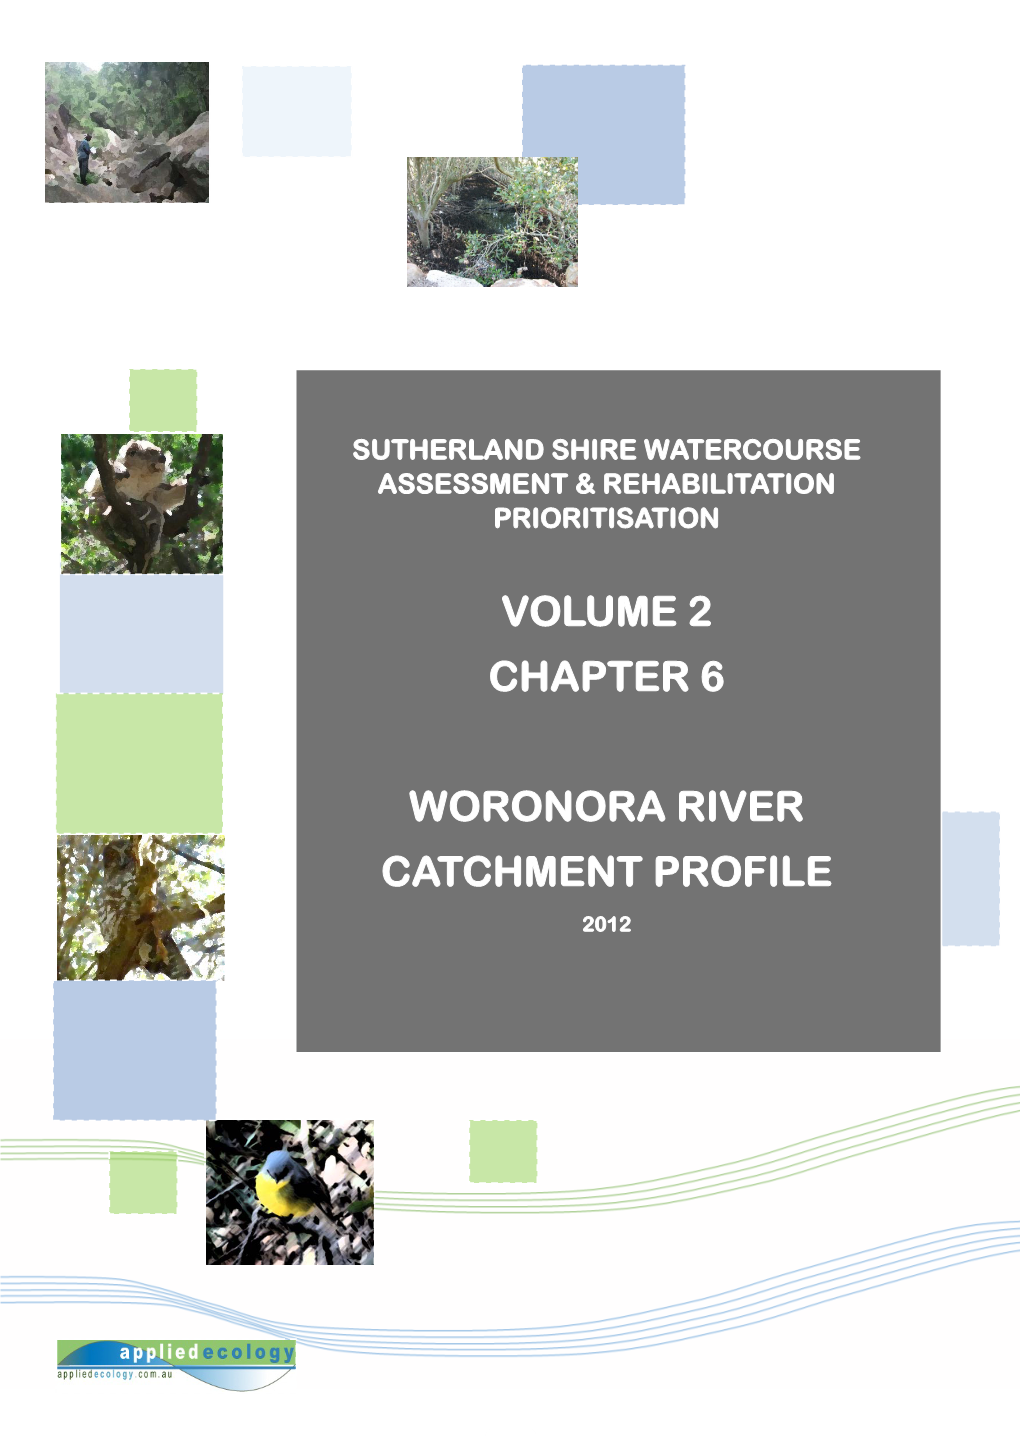 Volume 2 Chapter 6 Woronora River Catchment Profile